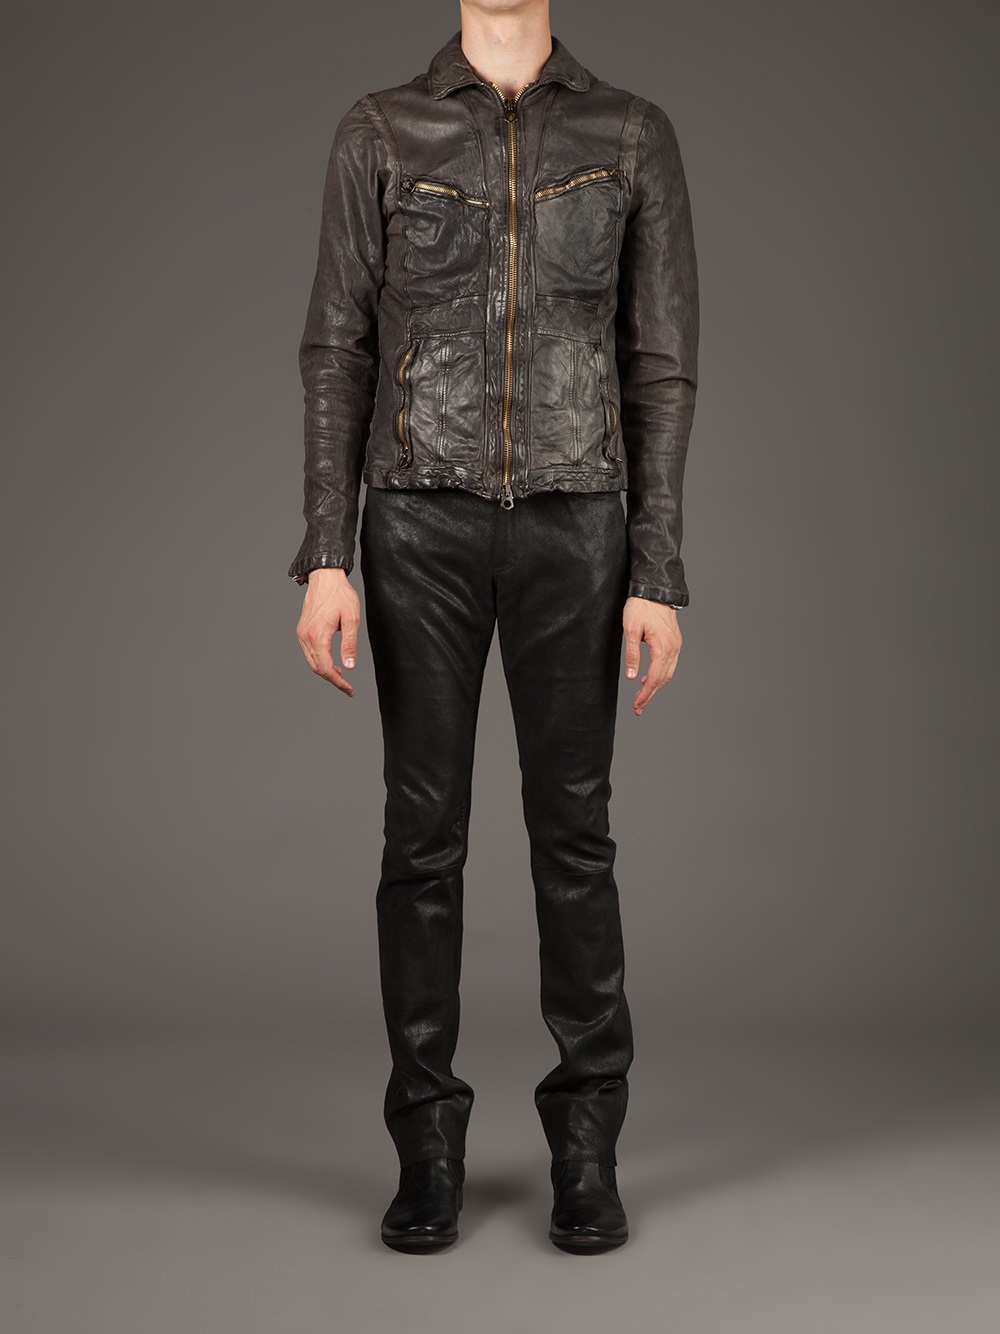 Giorgio Brato Distressed Leather Jacket in Brown for Men - Lyst